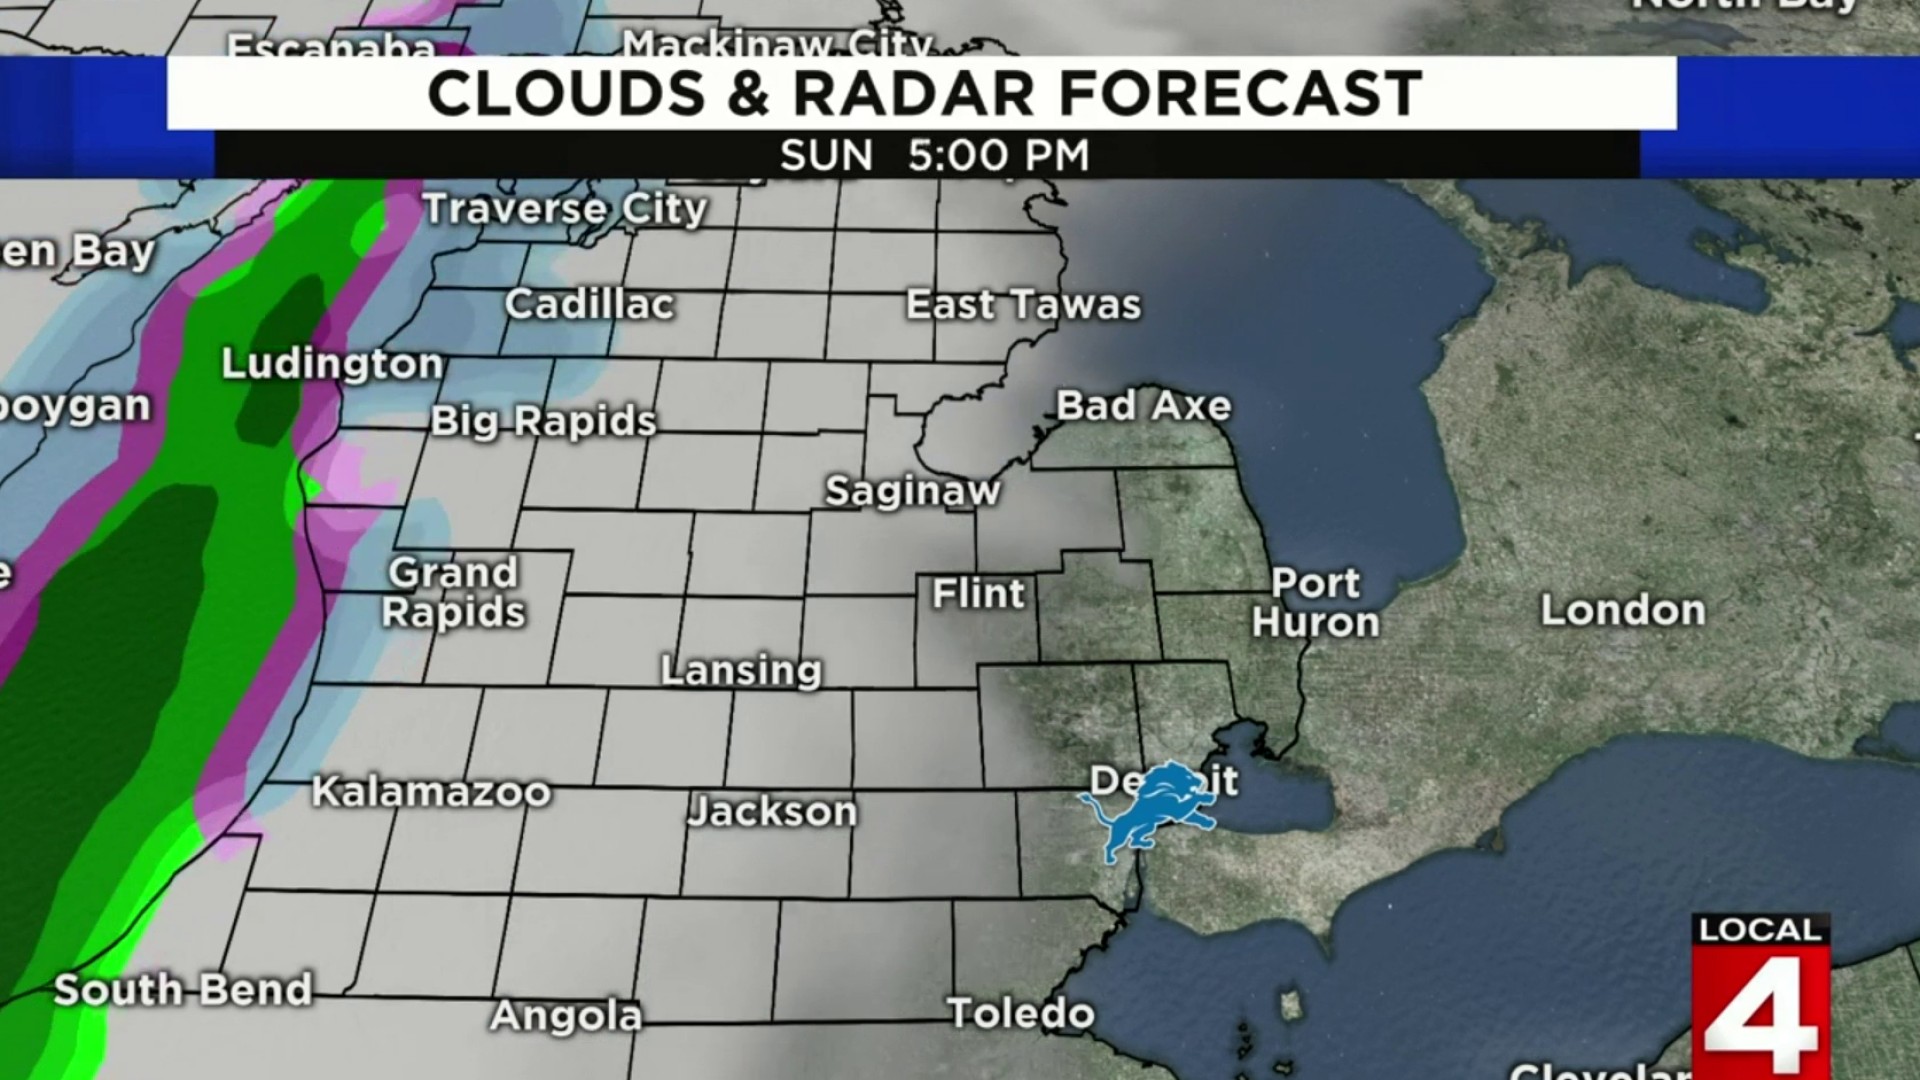 Metro Detroit weather: Dry, chilly Friday start - WDIV ClickOnDetroit